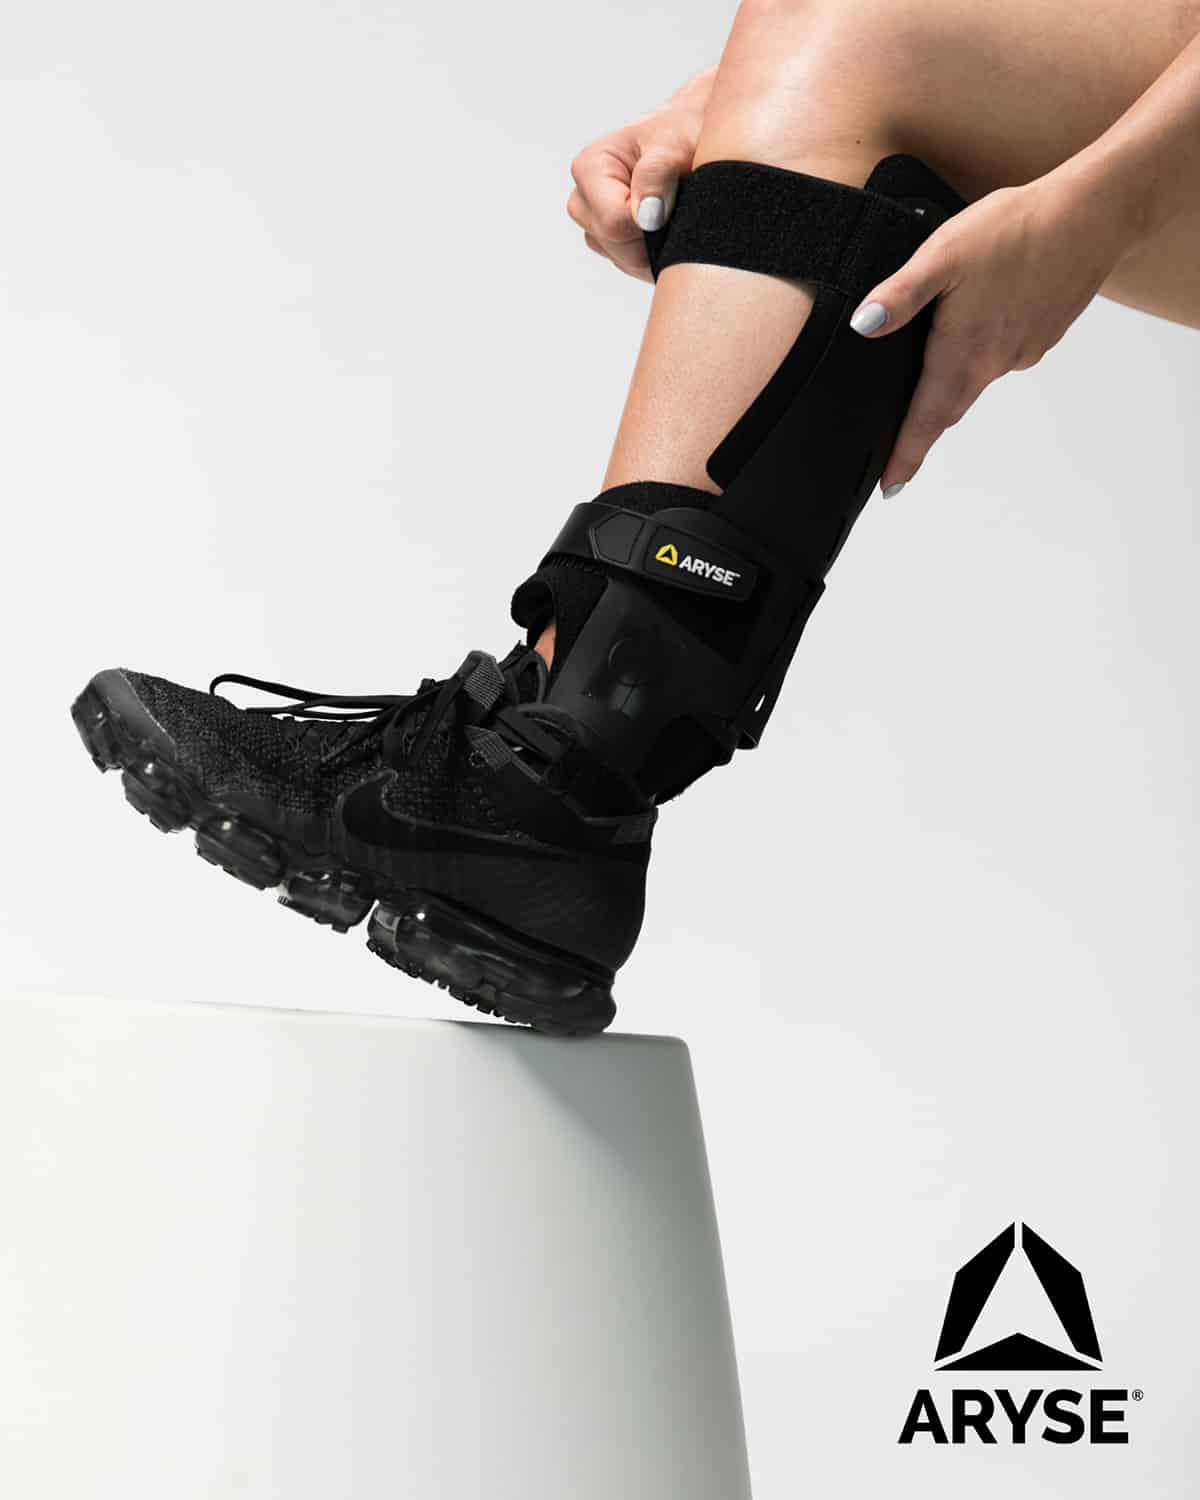 A woman wearing a black ARYSE METFORCE ANKLE on a white pedestal purchased from ARTIK Medical Supply.